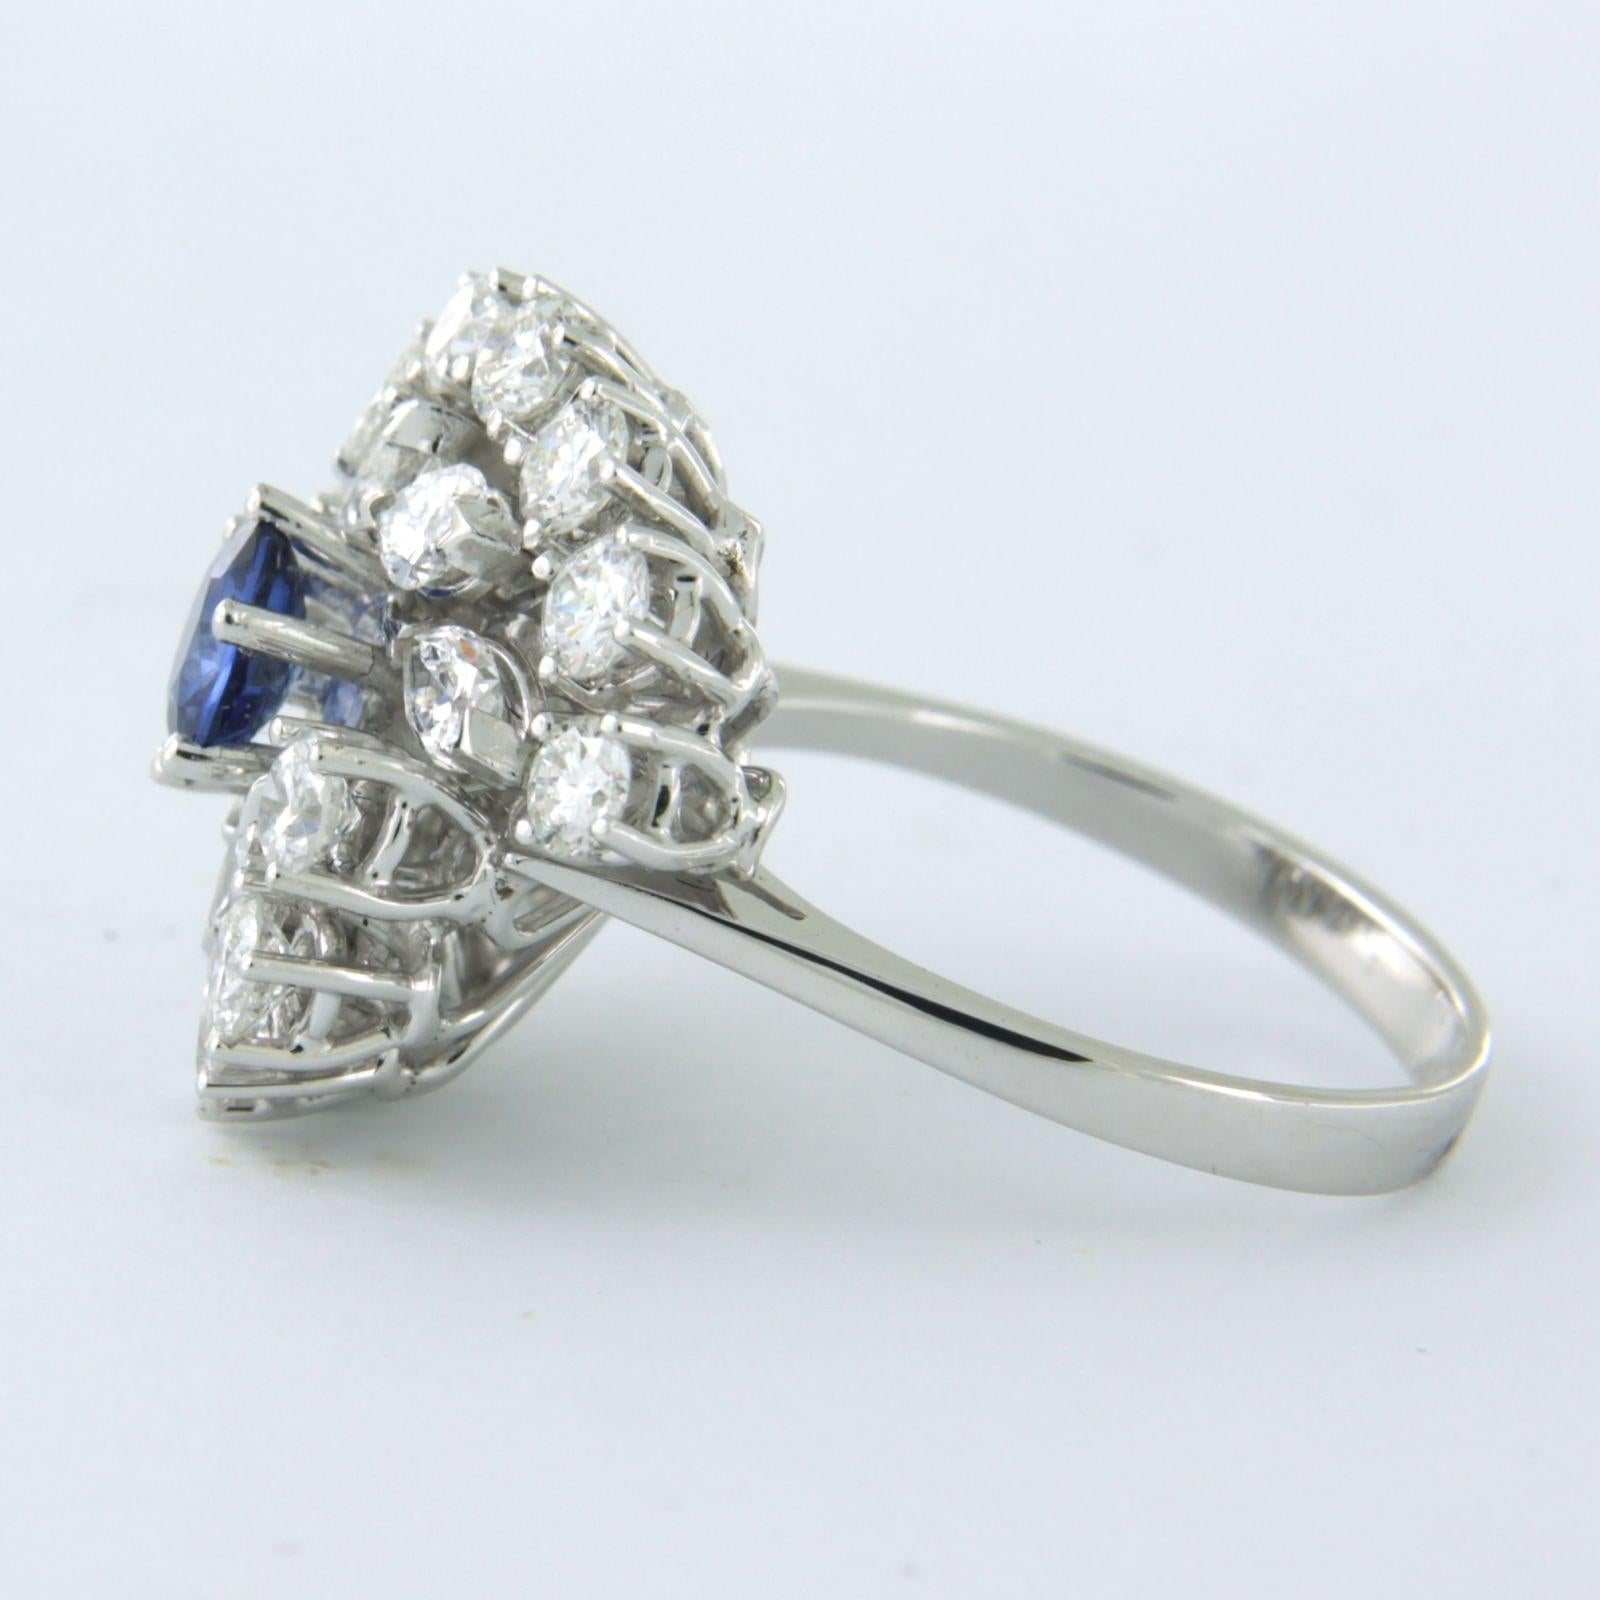 Brilliant Cut 18k white gold cluster ring with a sapphire and diamonds